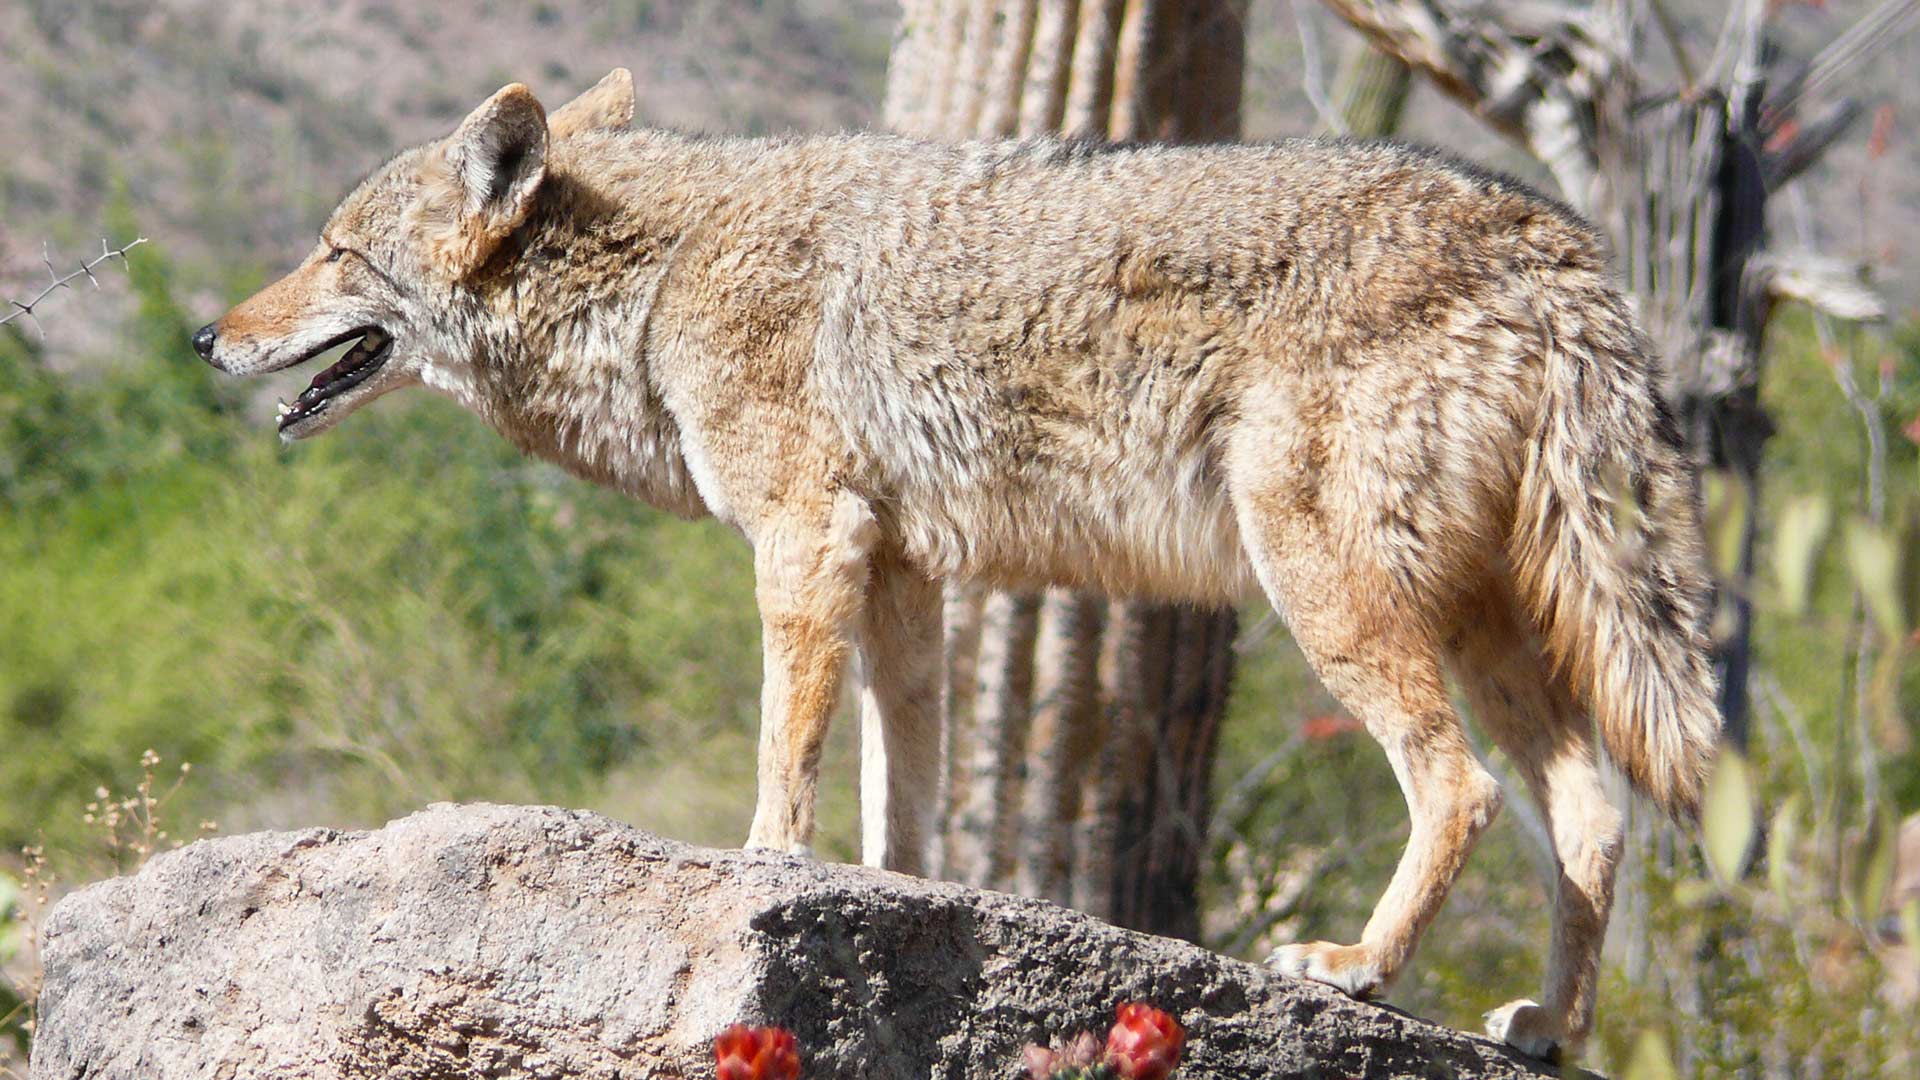 A coyote at the Arizona-Sonora Desert Museum.